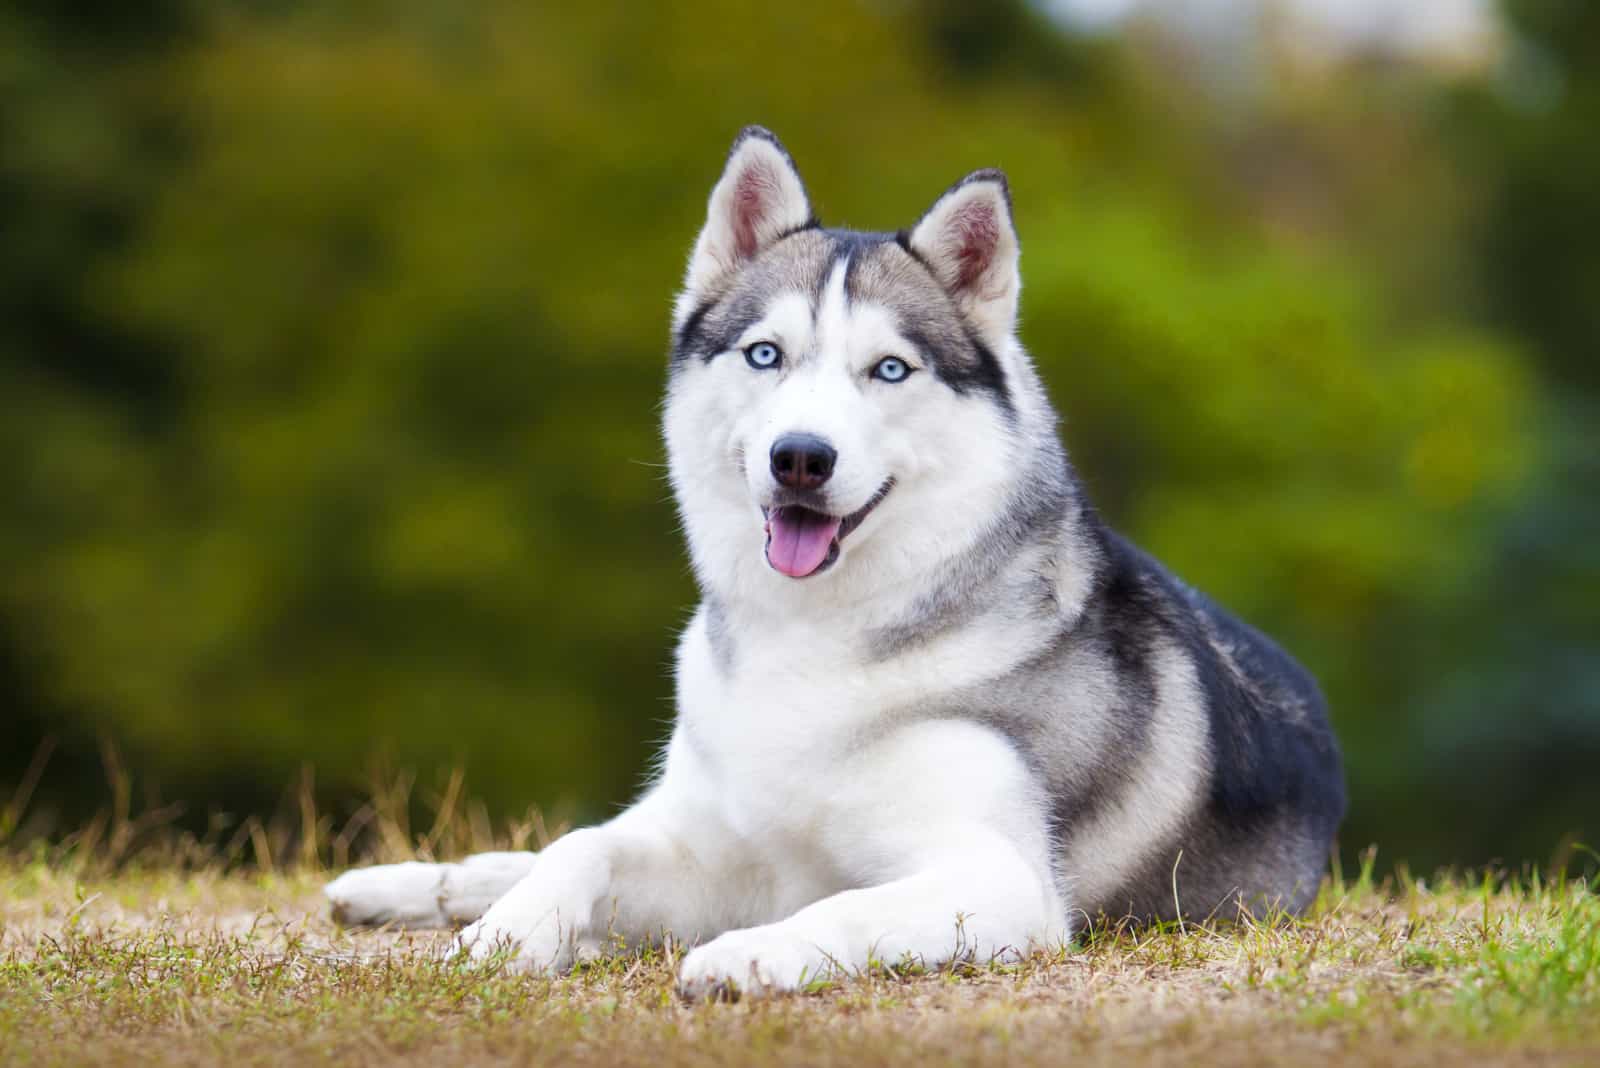 Siberian Husky is lying down and looking at the camera